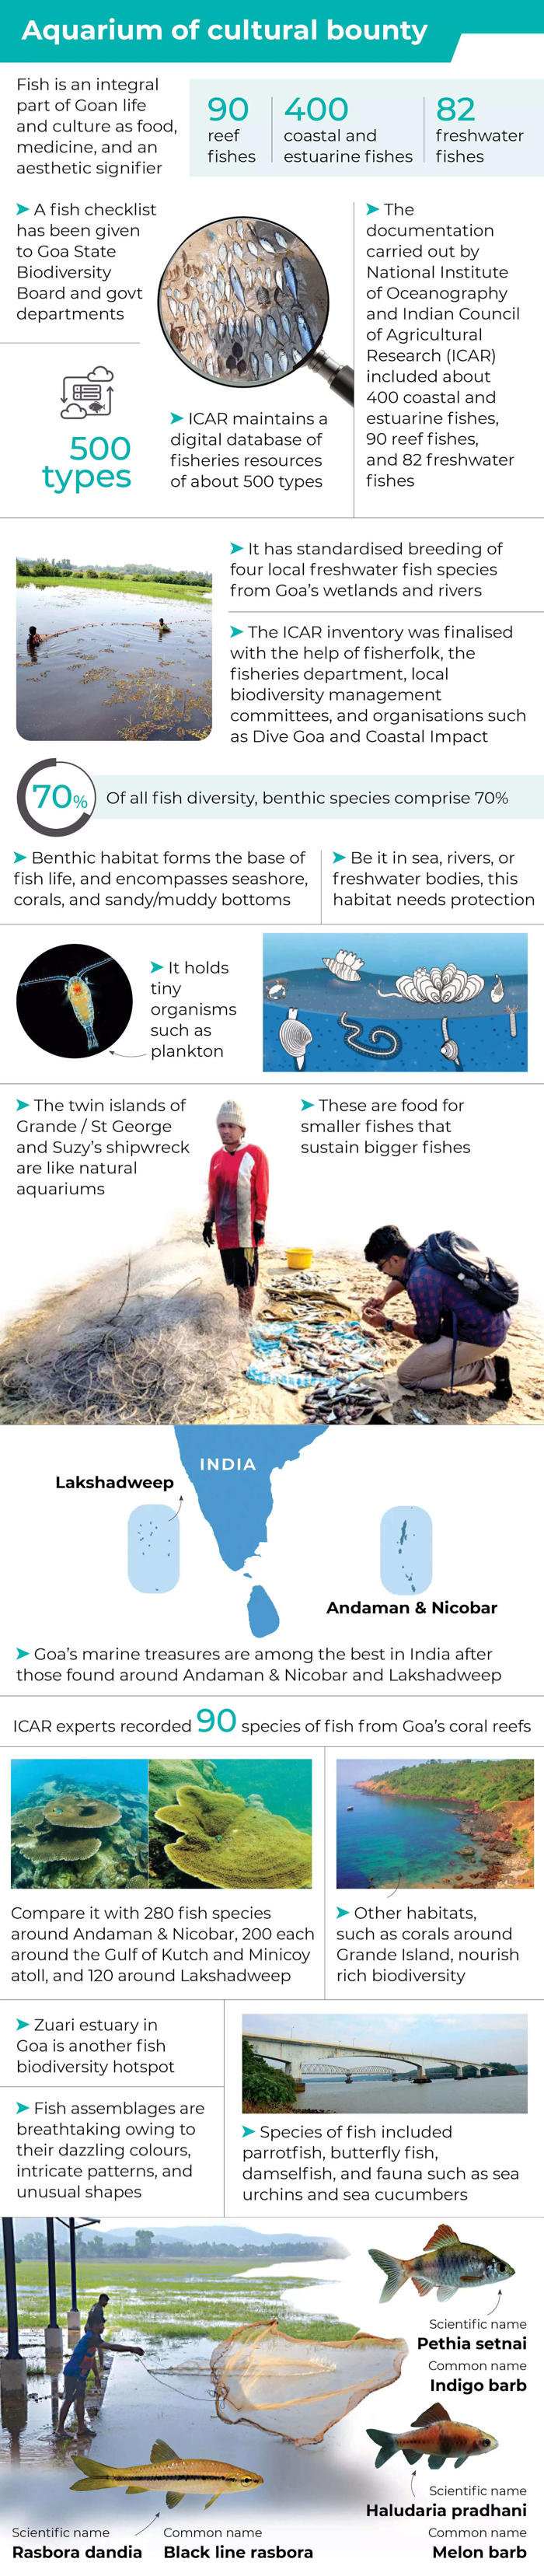 fishing out data on goa’s marine wealth